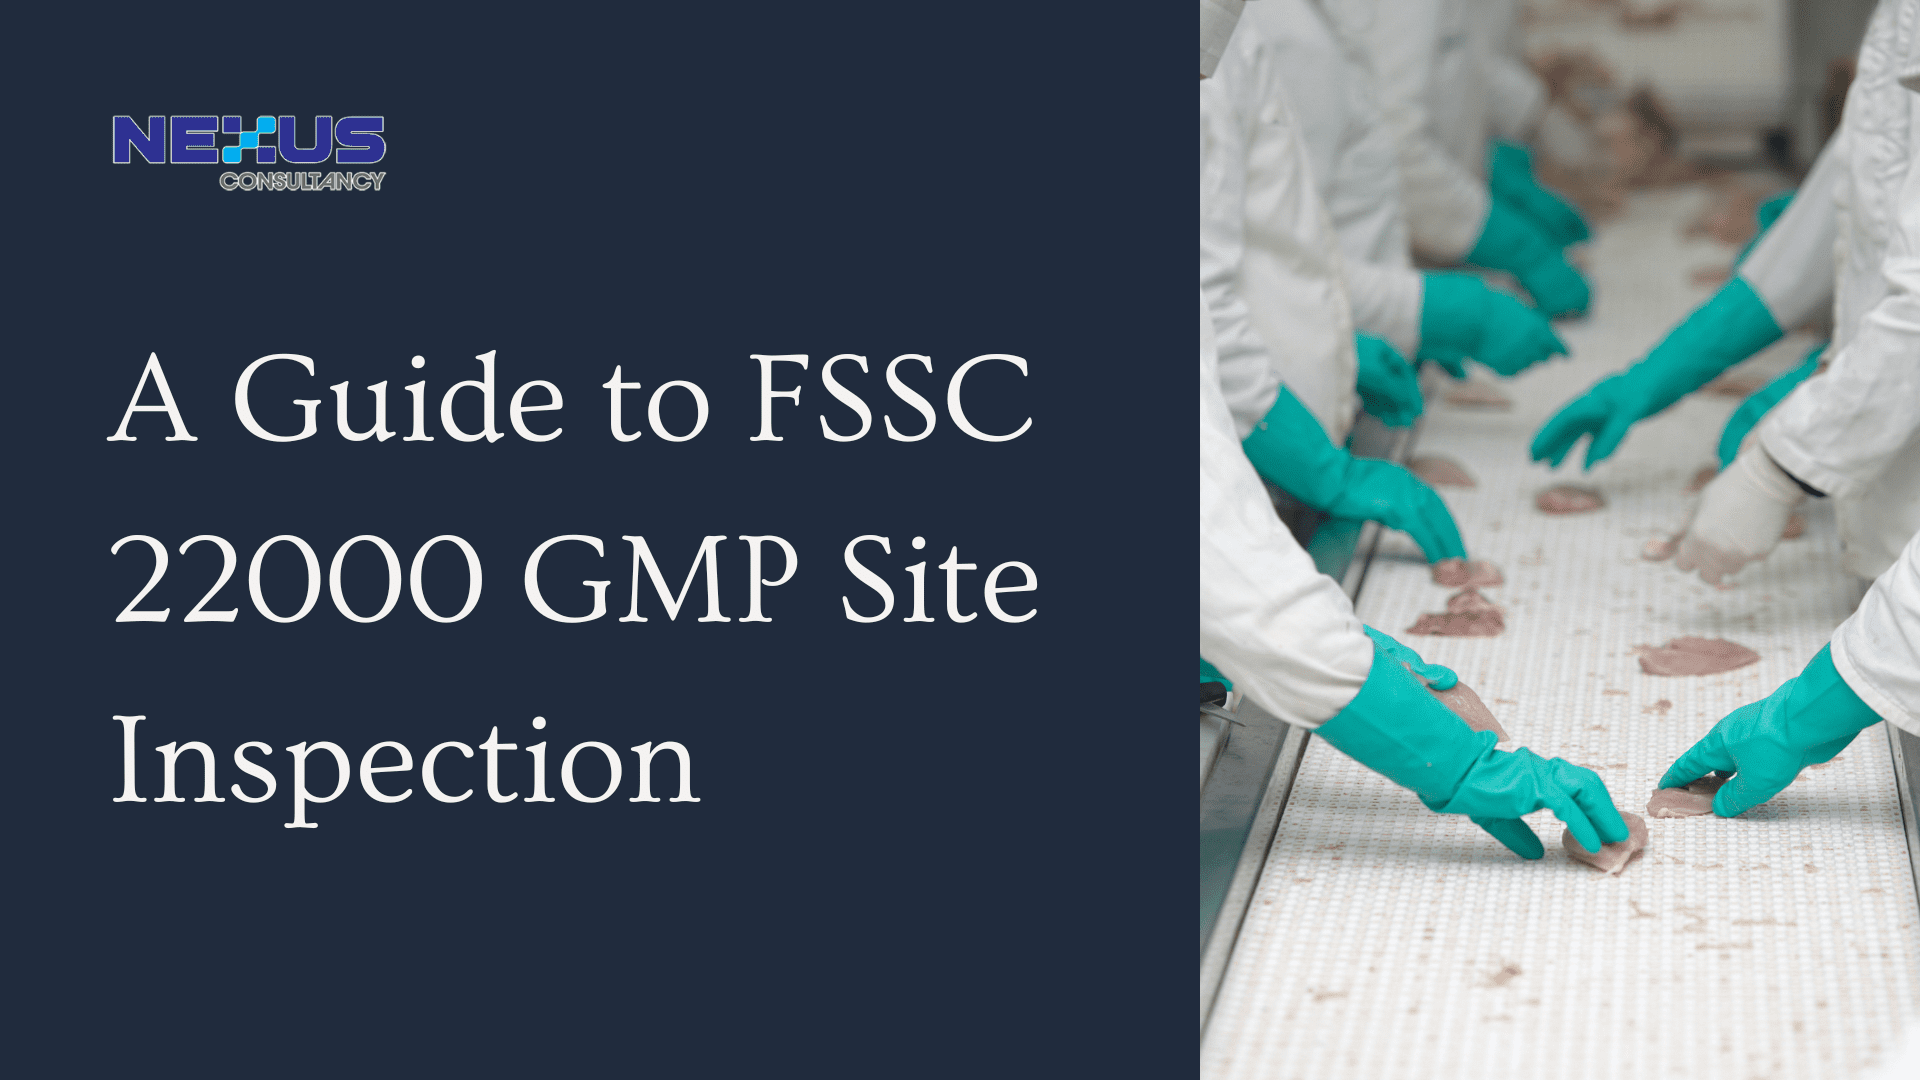 A Guide to FSSC 22000 GMP Site Inspection